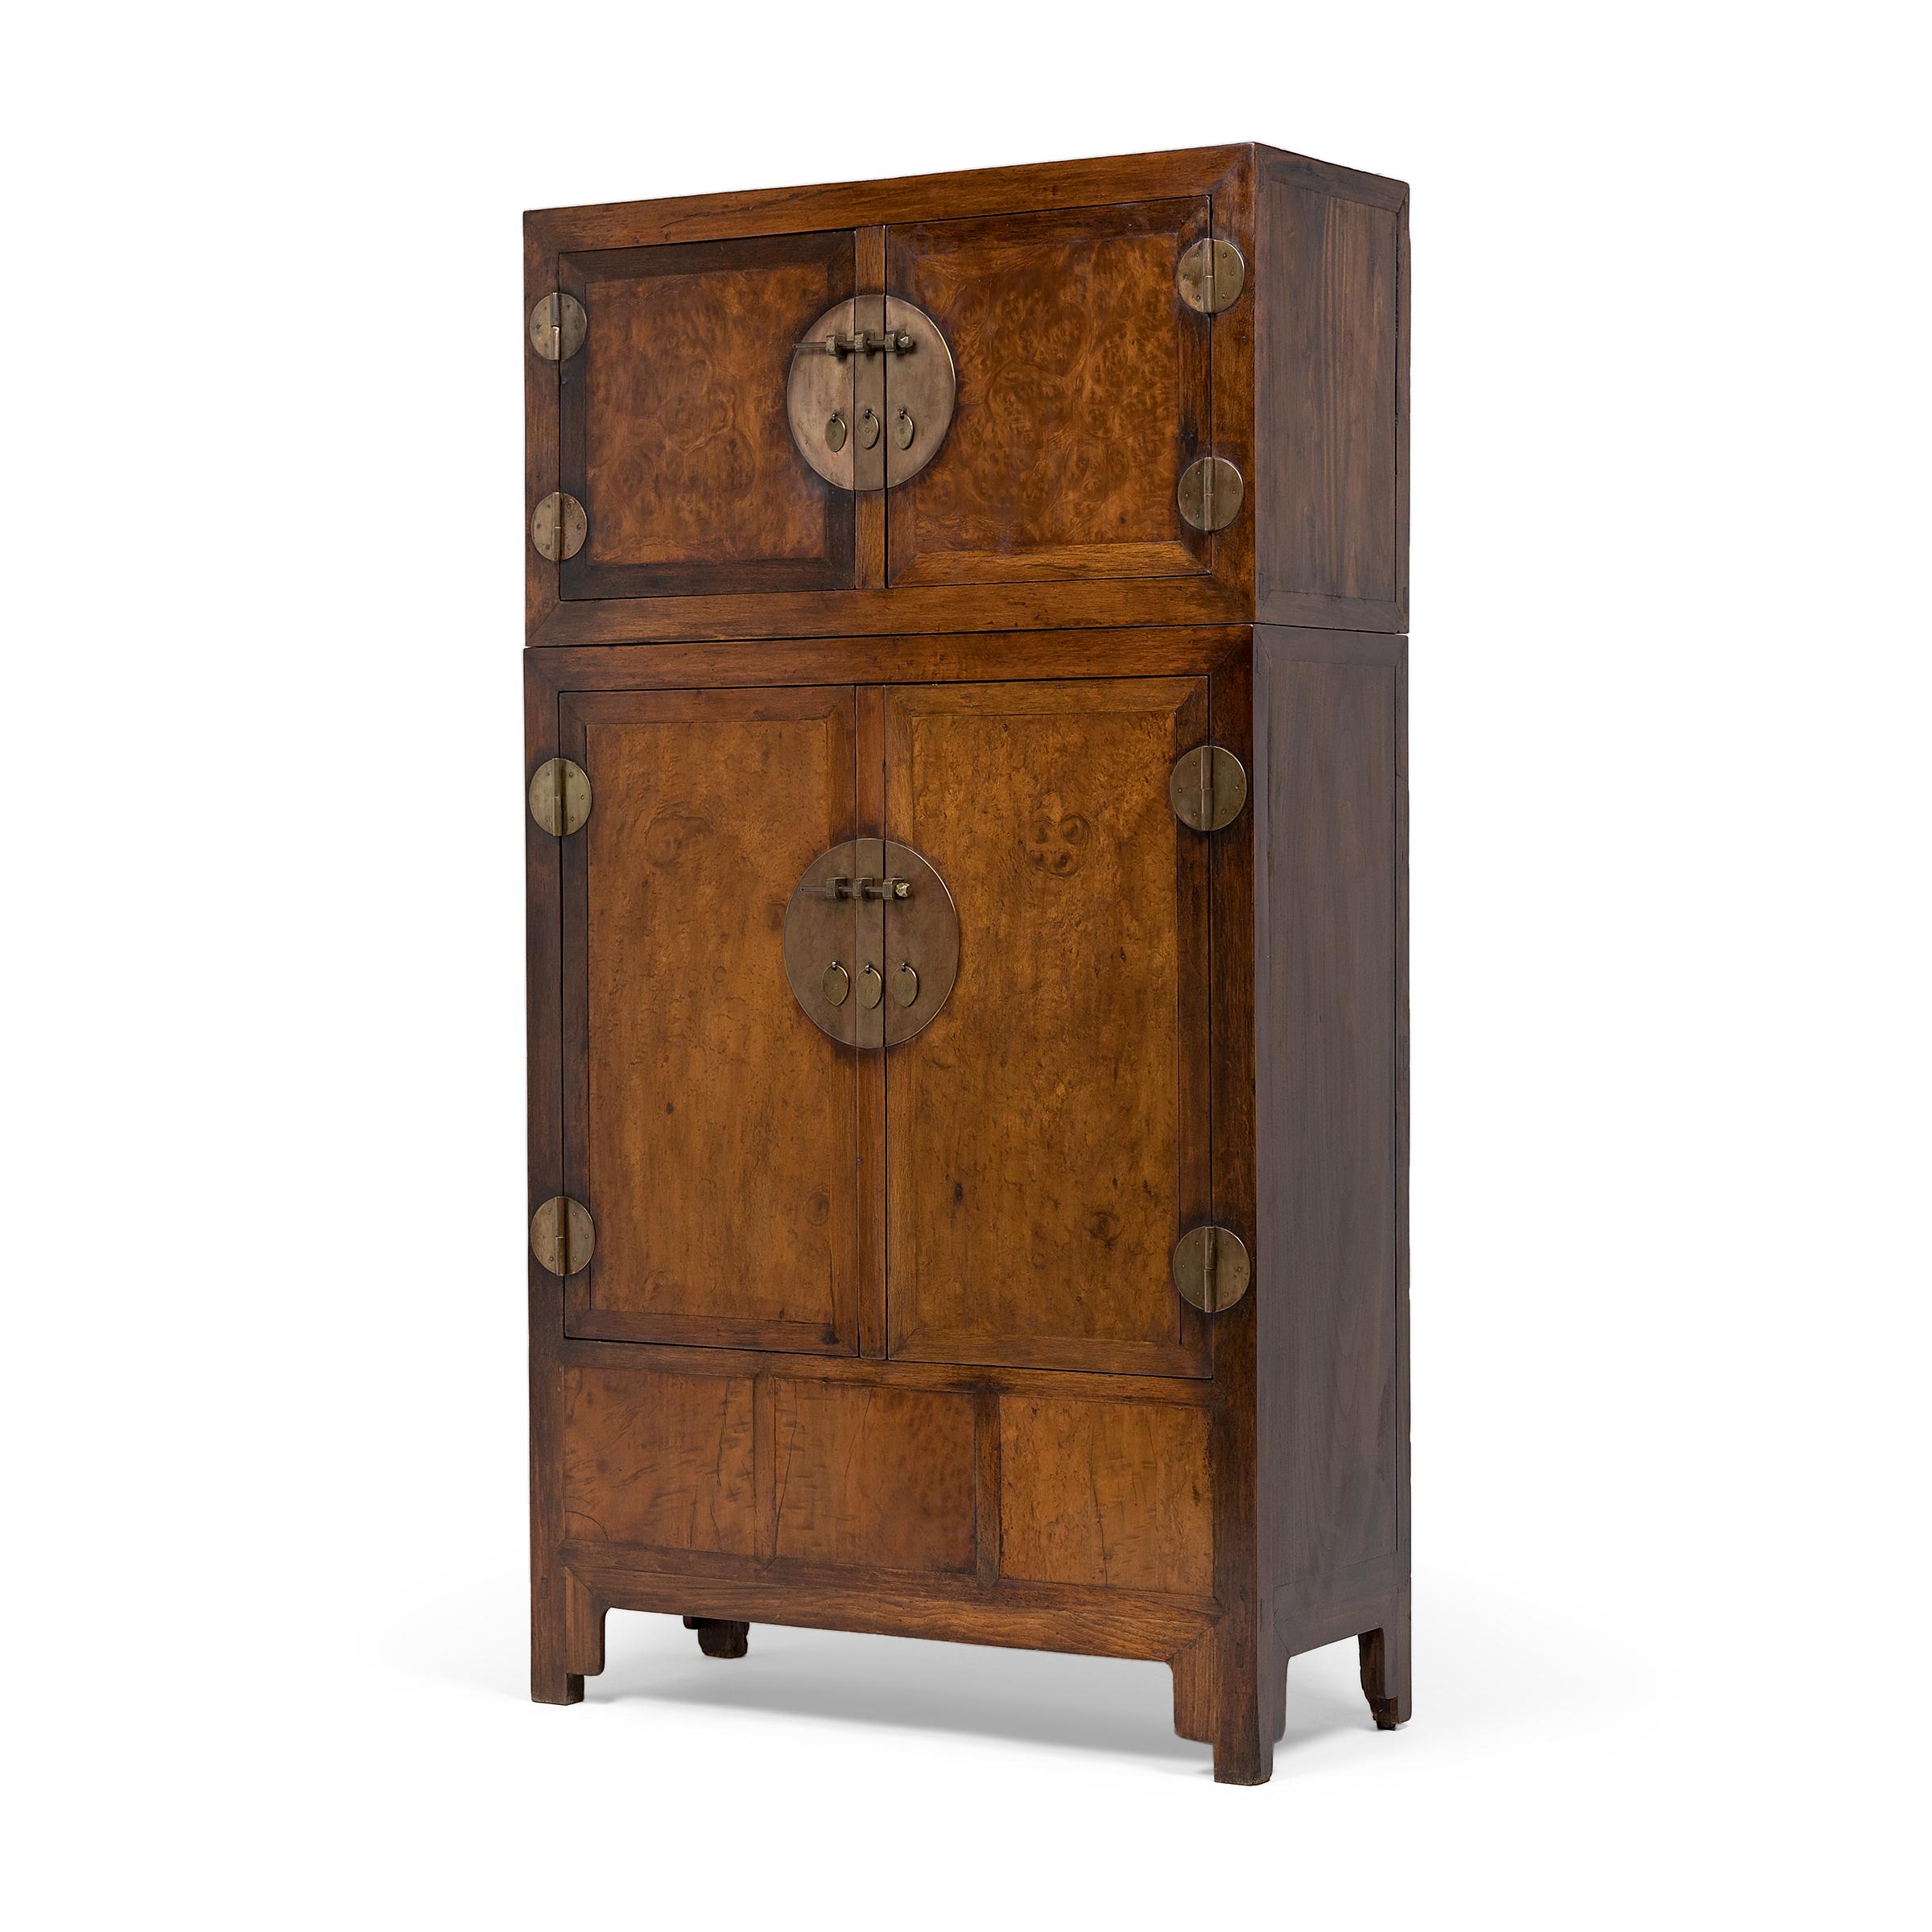 Pair of Chinese Camphor Burl Compound Cabinets, c. 1850 For Sale 8